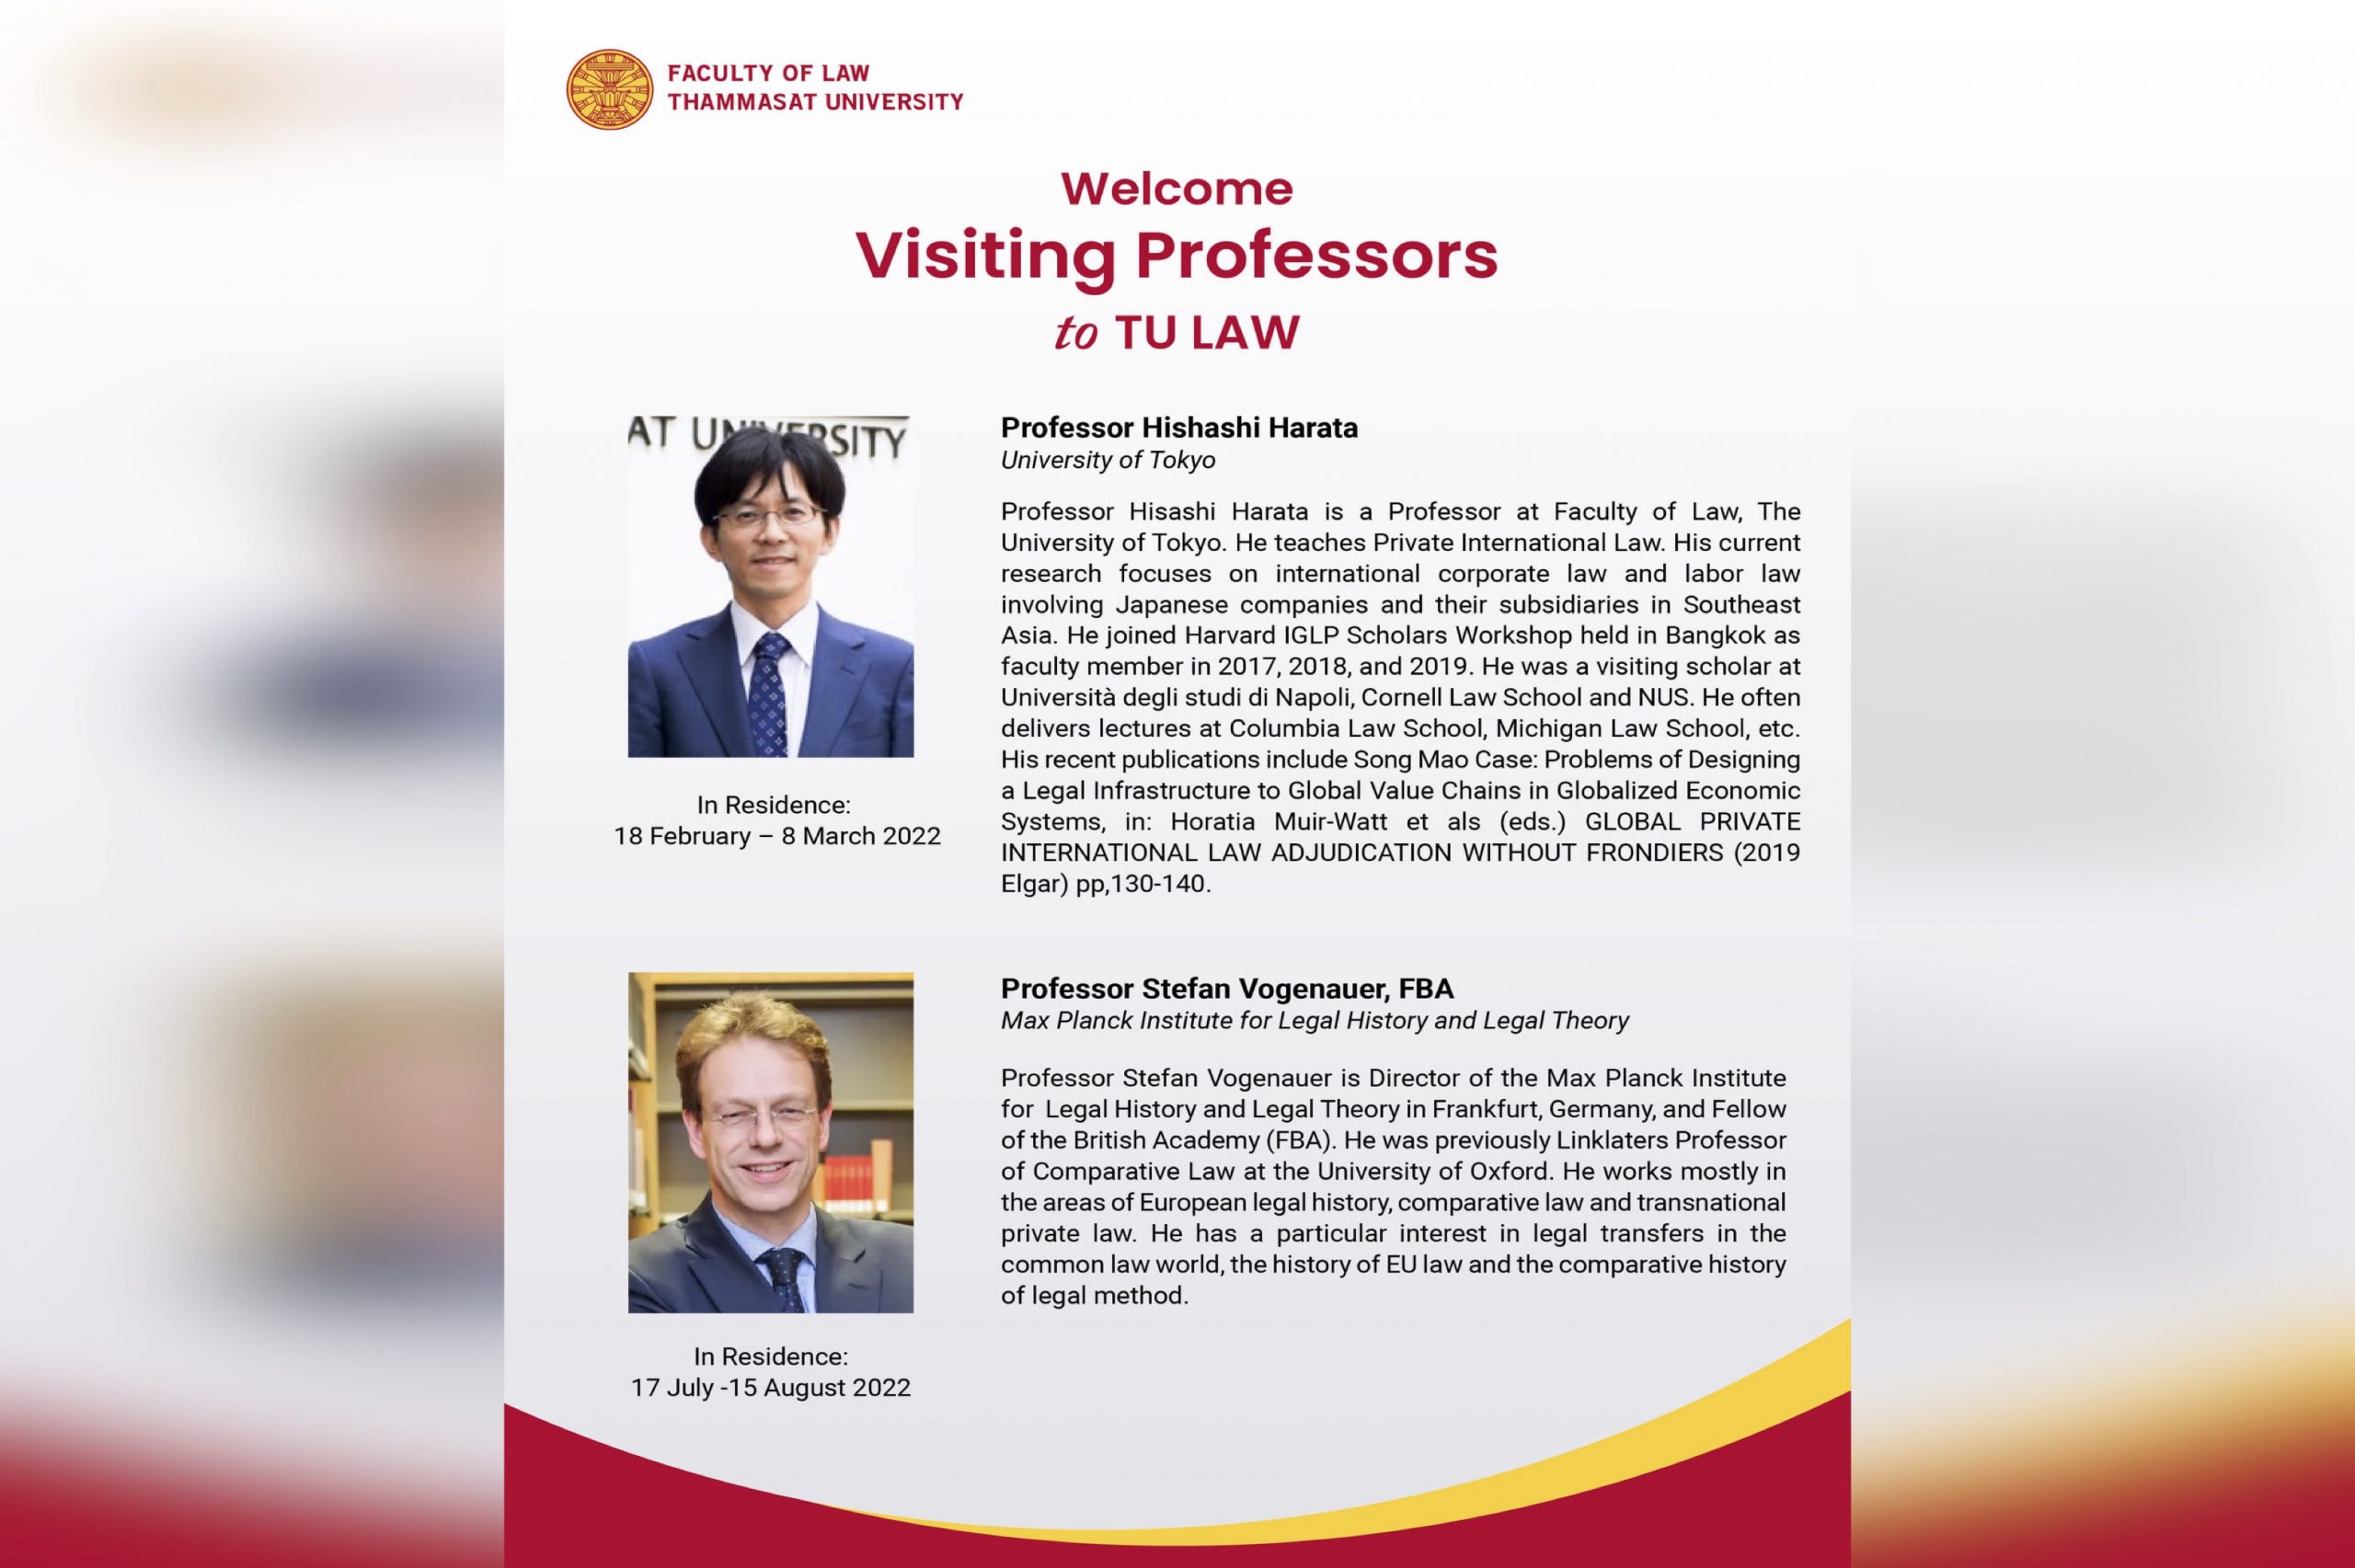 Thammasat University Faculty of Law is honoured to welcome our Visiting Professors in 2022.